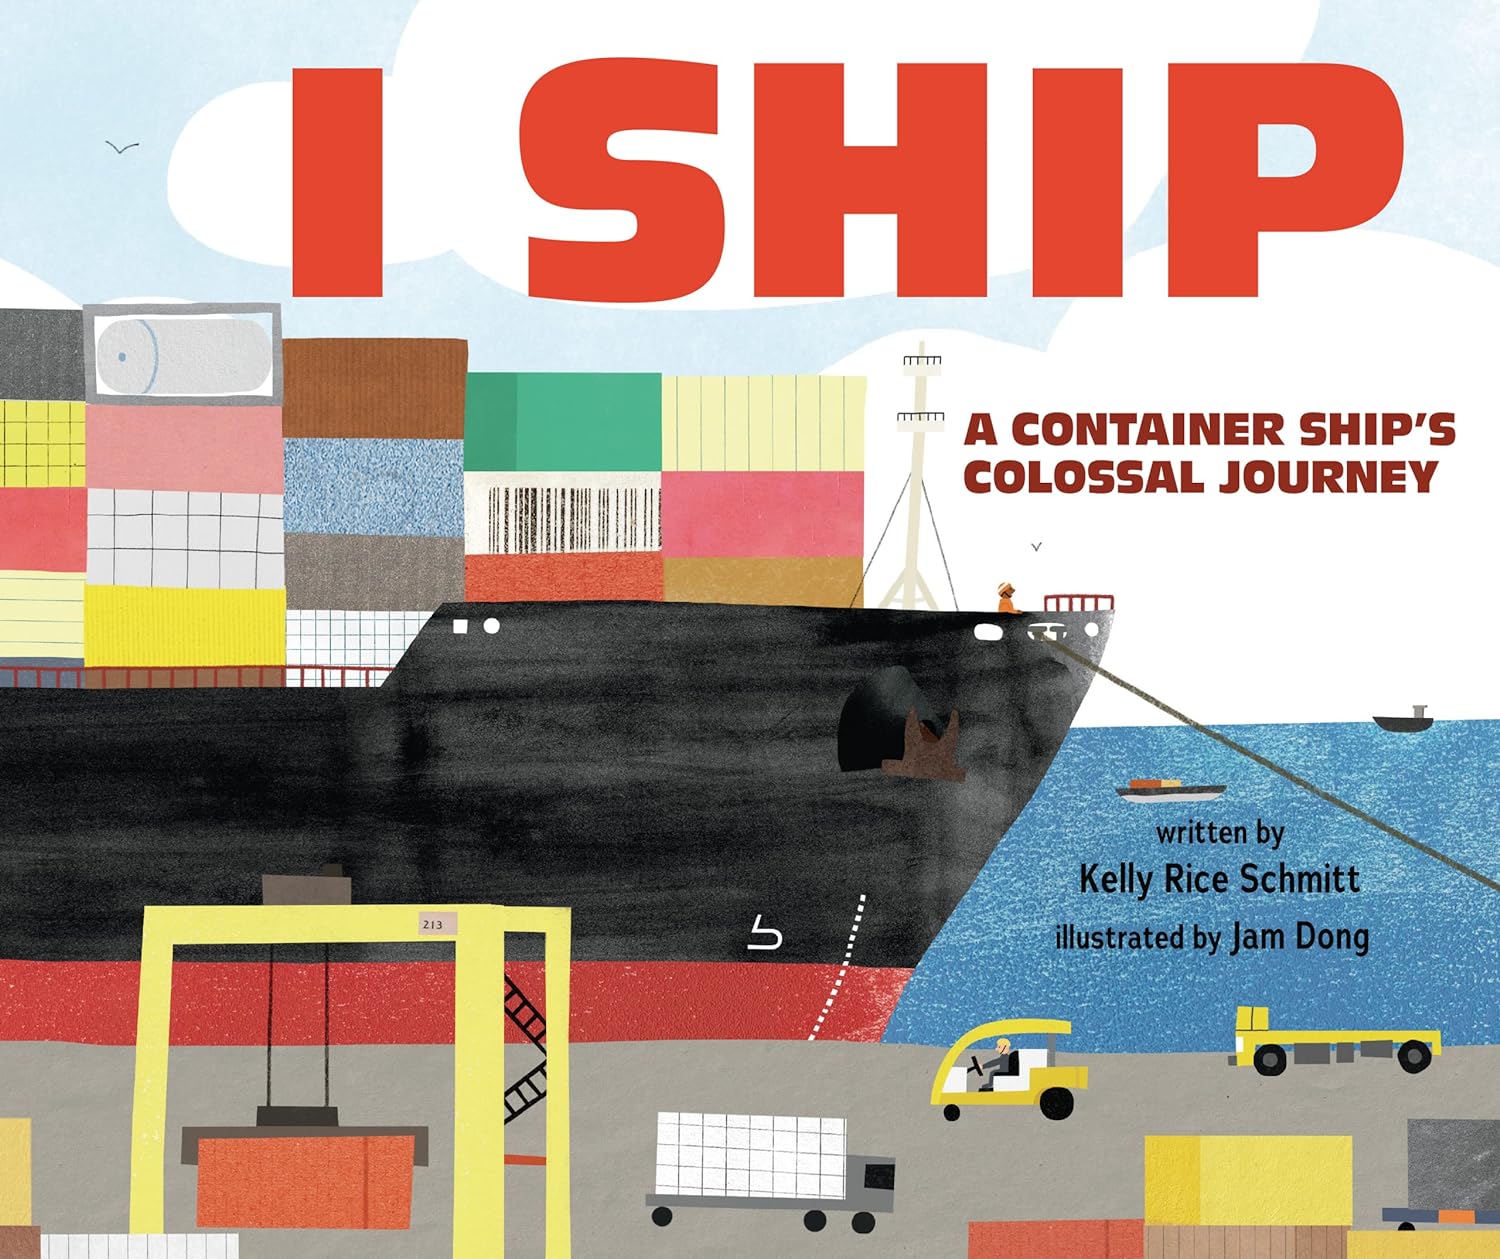 "I ship: A Container Ship's Colossal Journey" book cover with a picture of a container ship